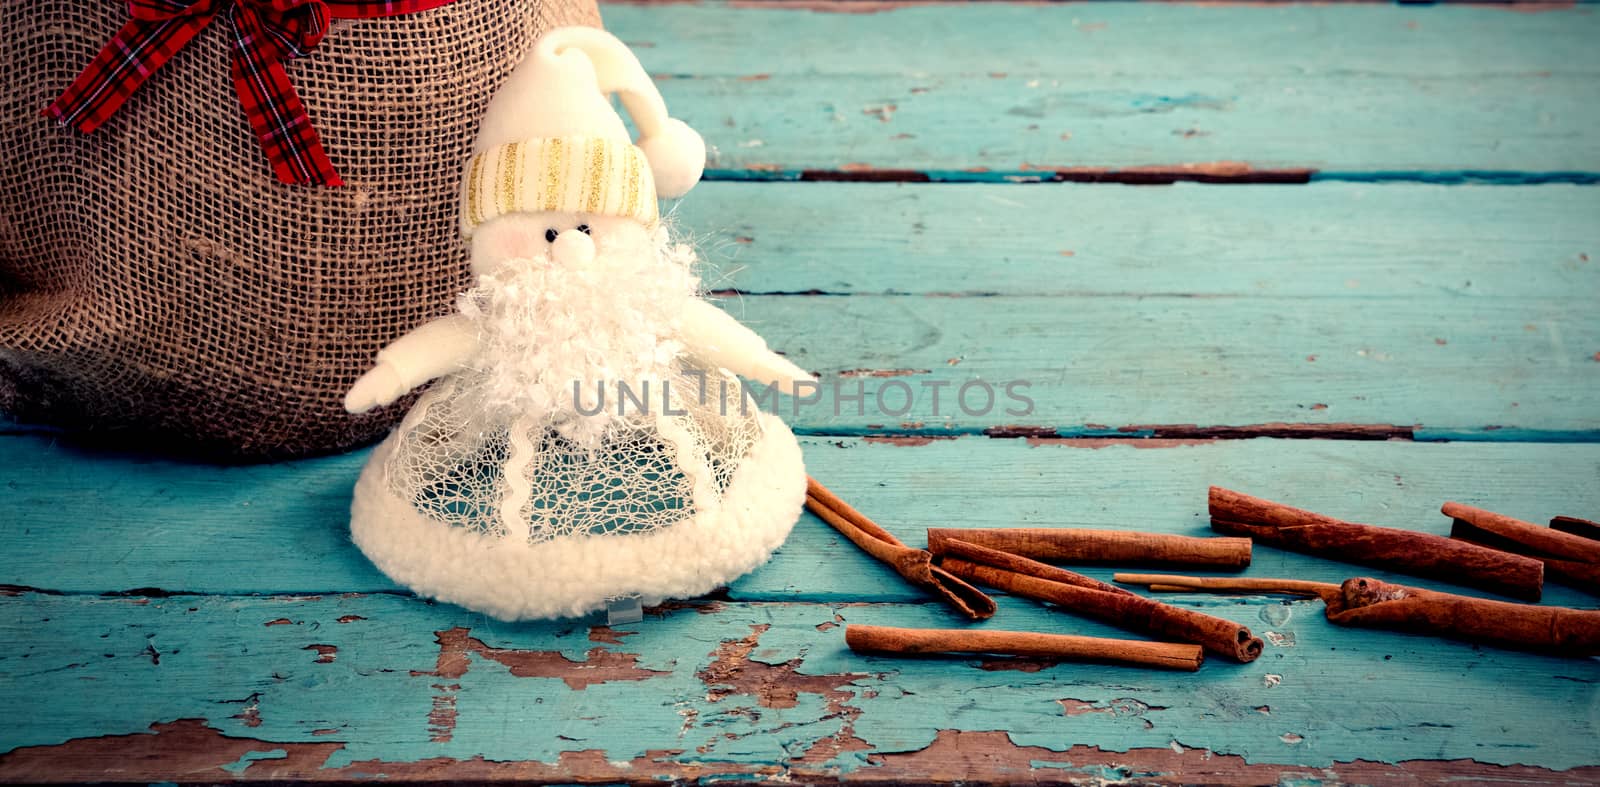 Cinnamon sticks and christmas decoration by sack on wooden table against white background with vignette